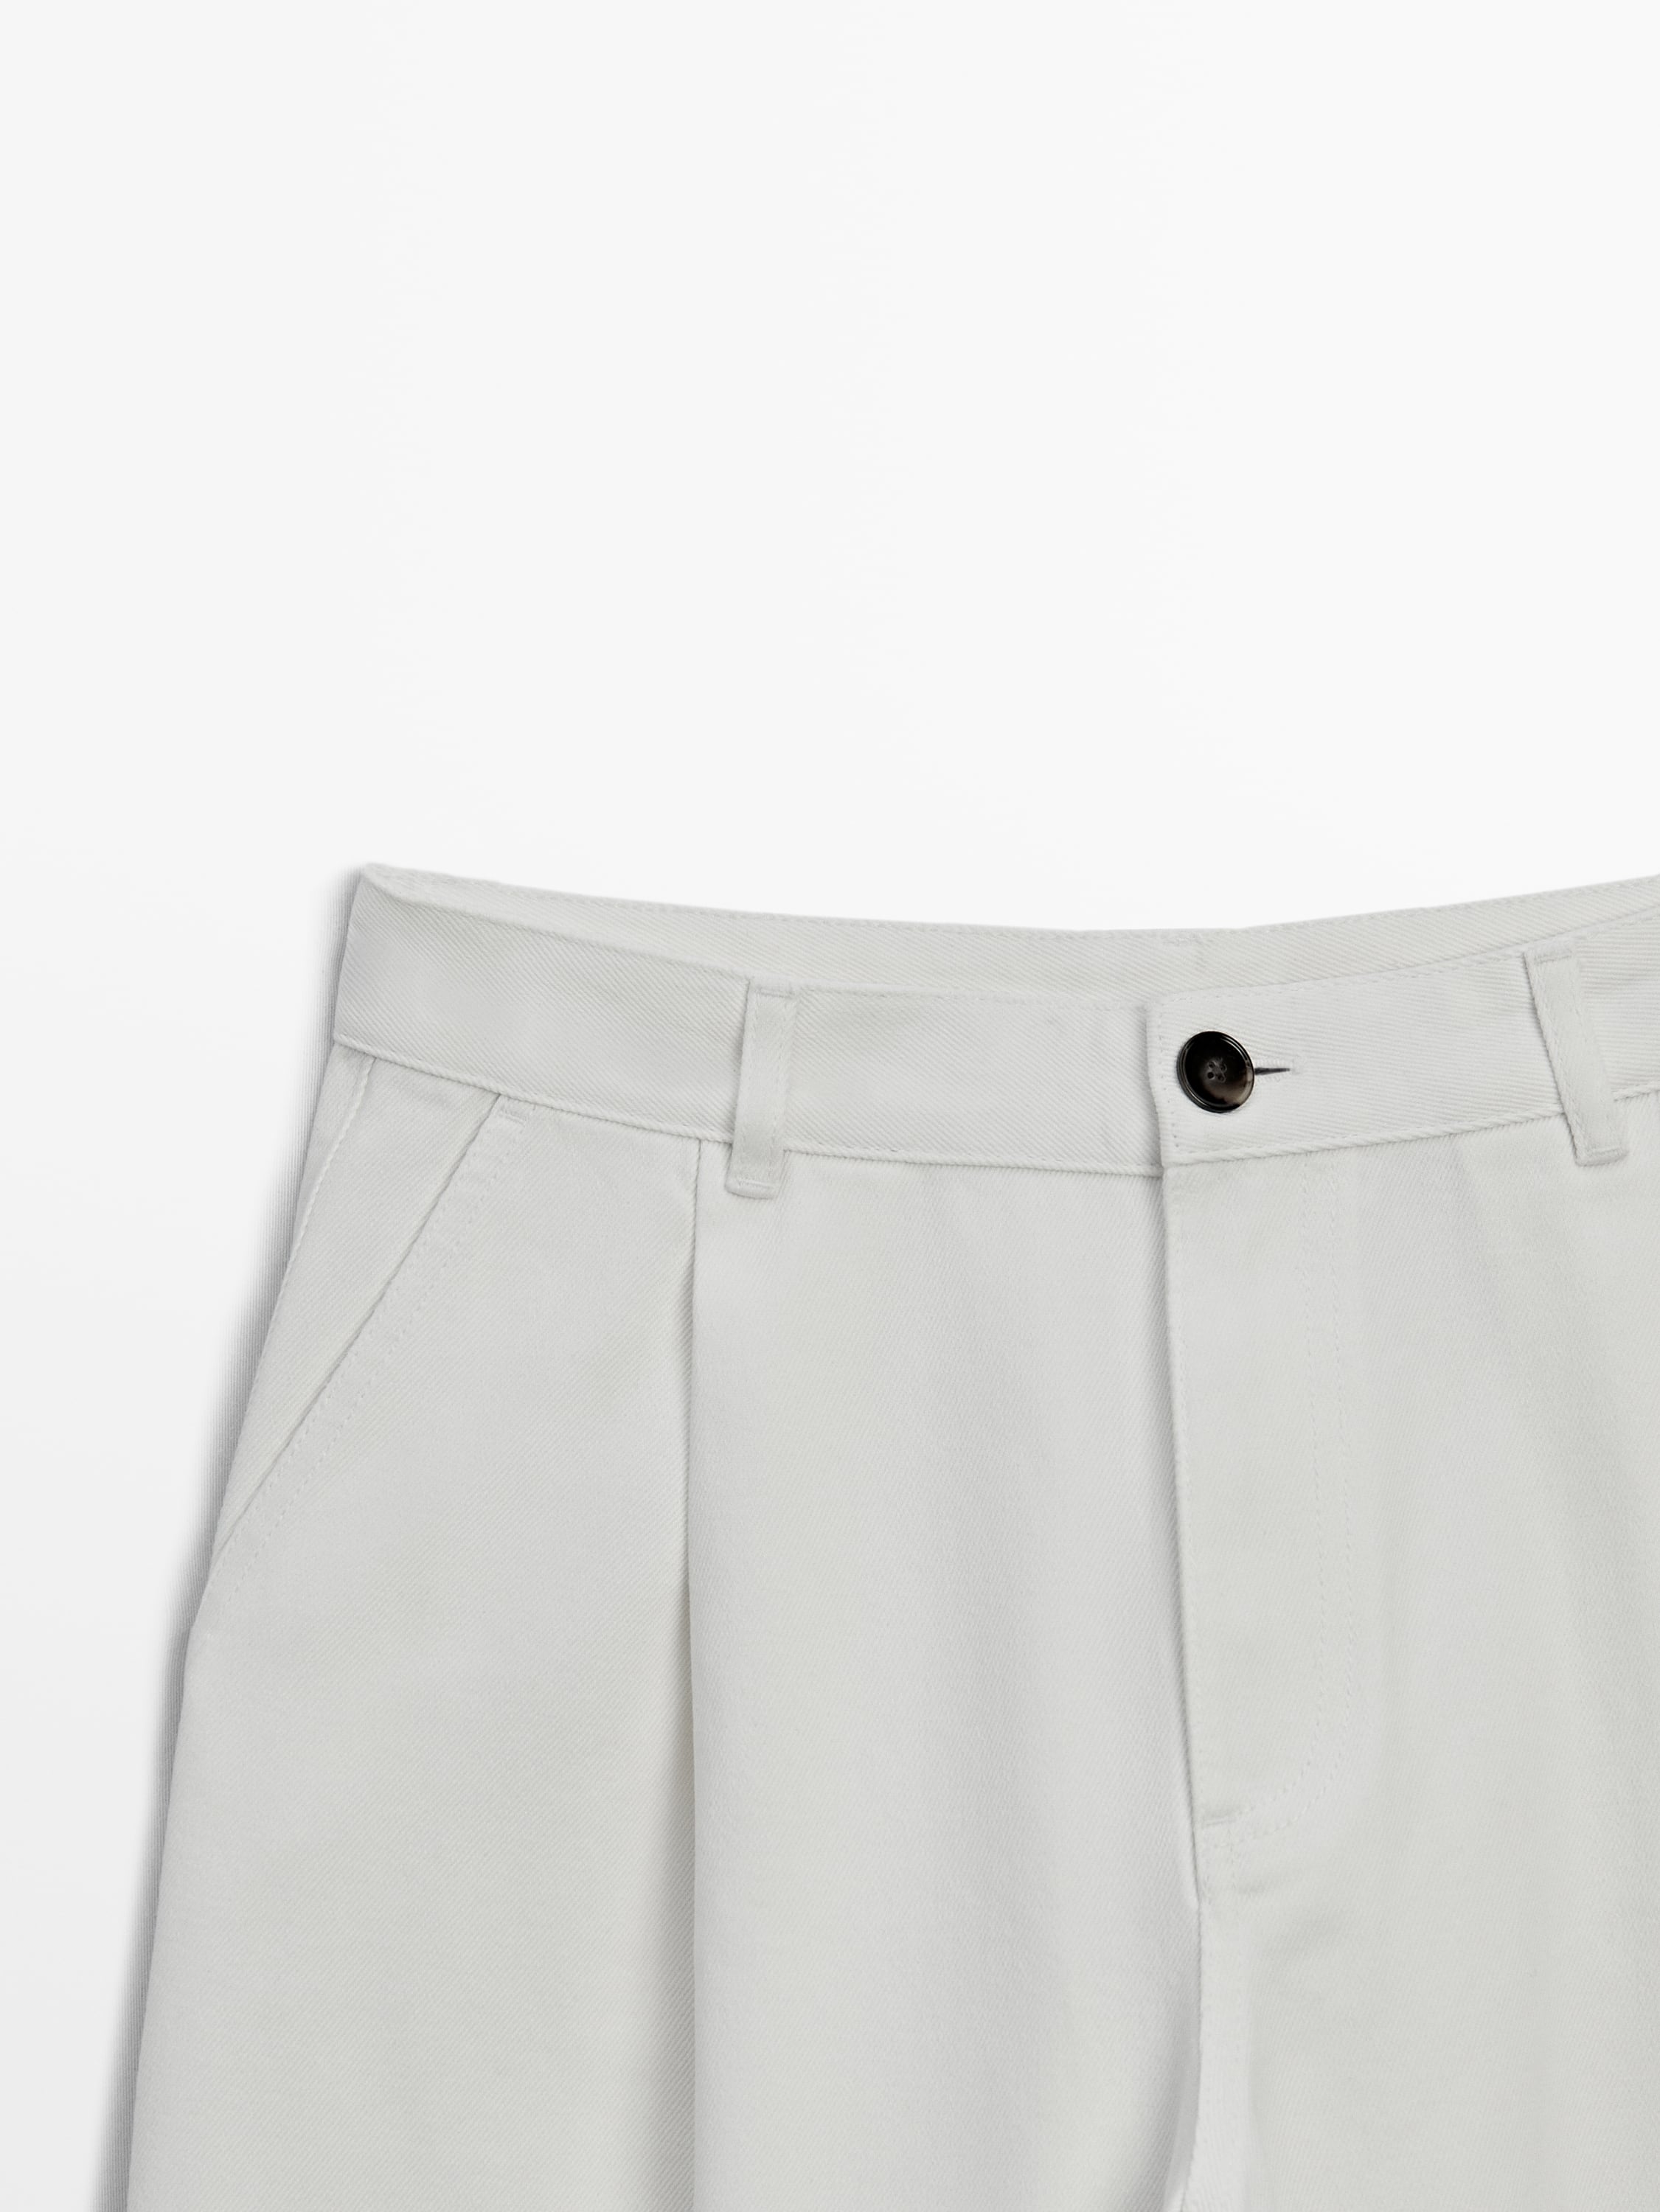 Twill cotton trousers with double darts